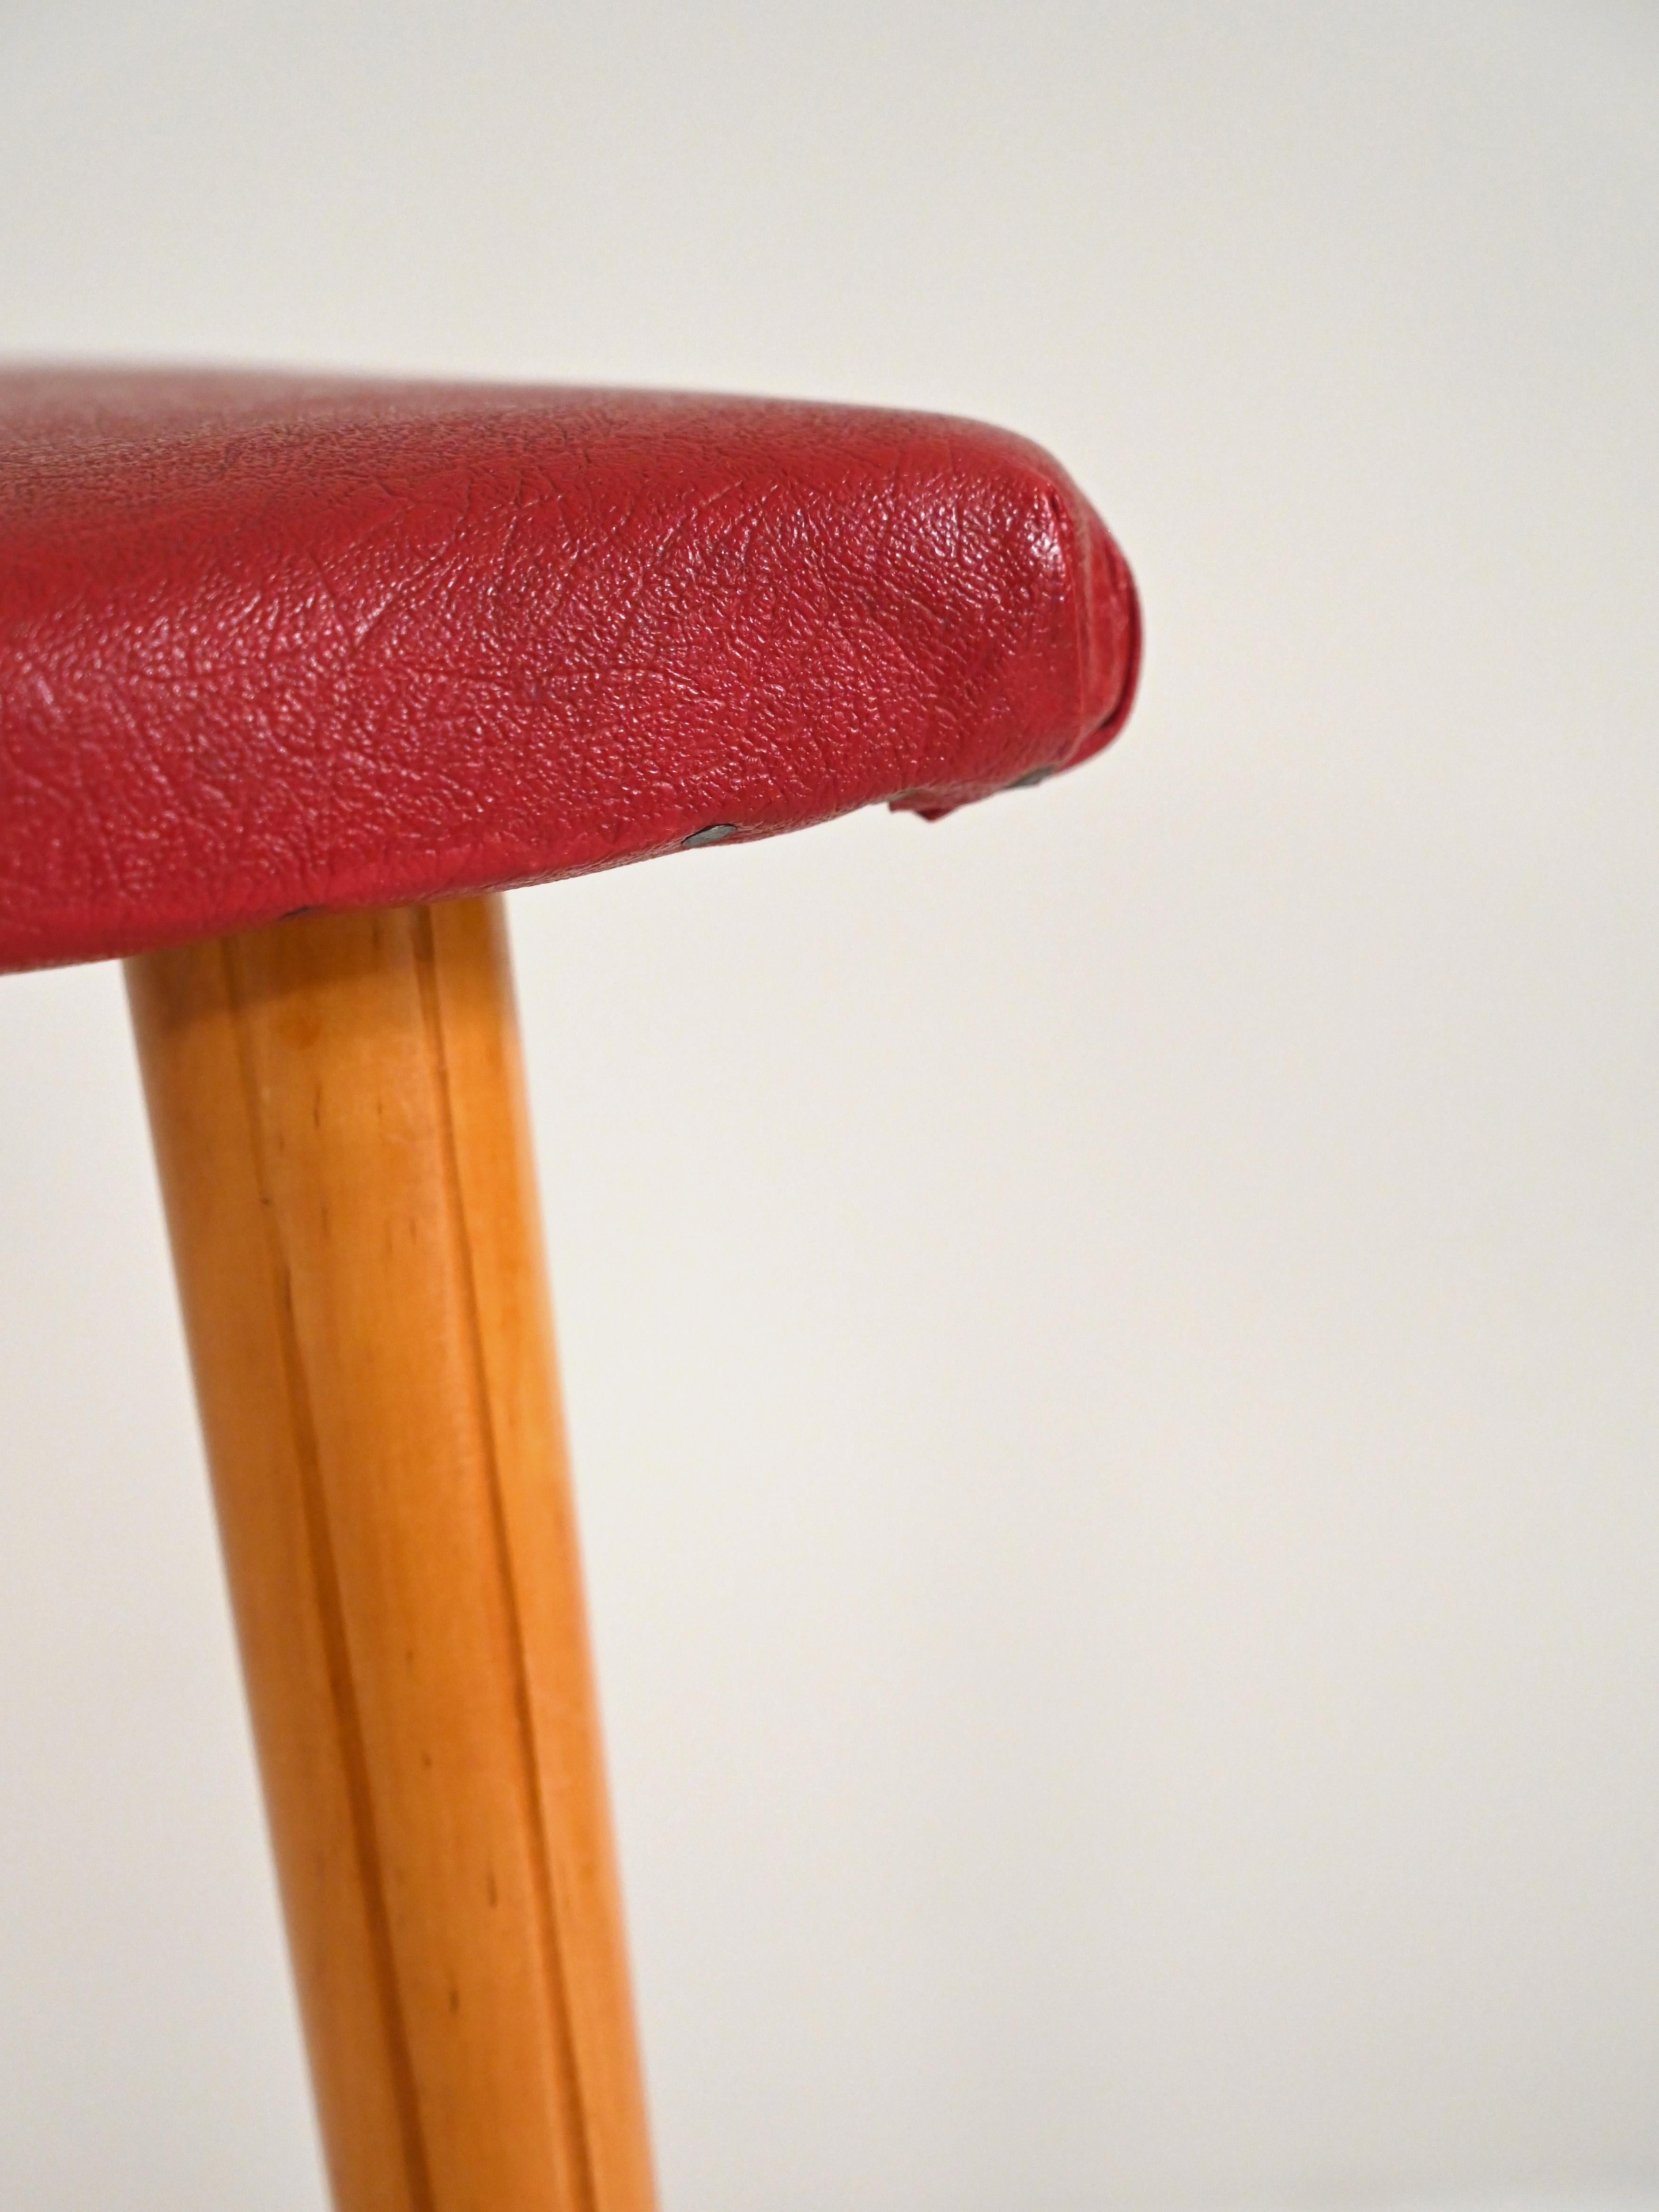 Faux Leather Vintage Wood and Red Leatherette Stool